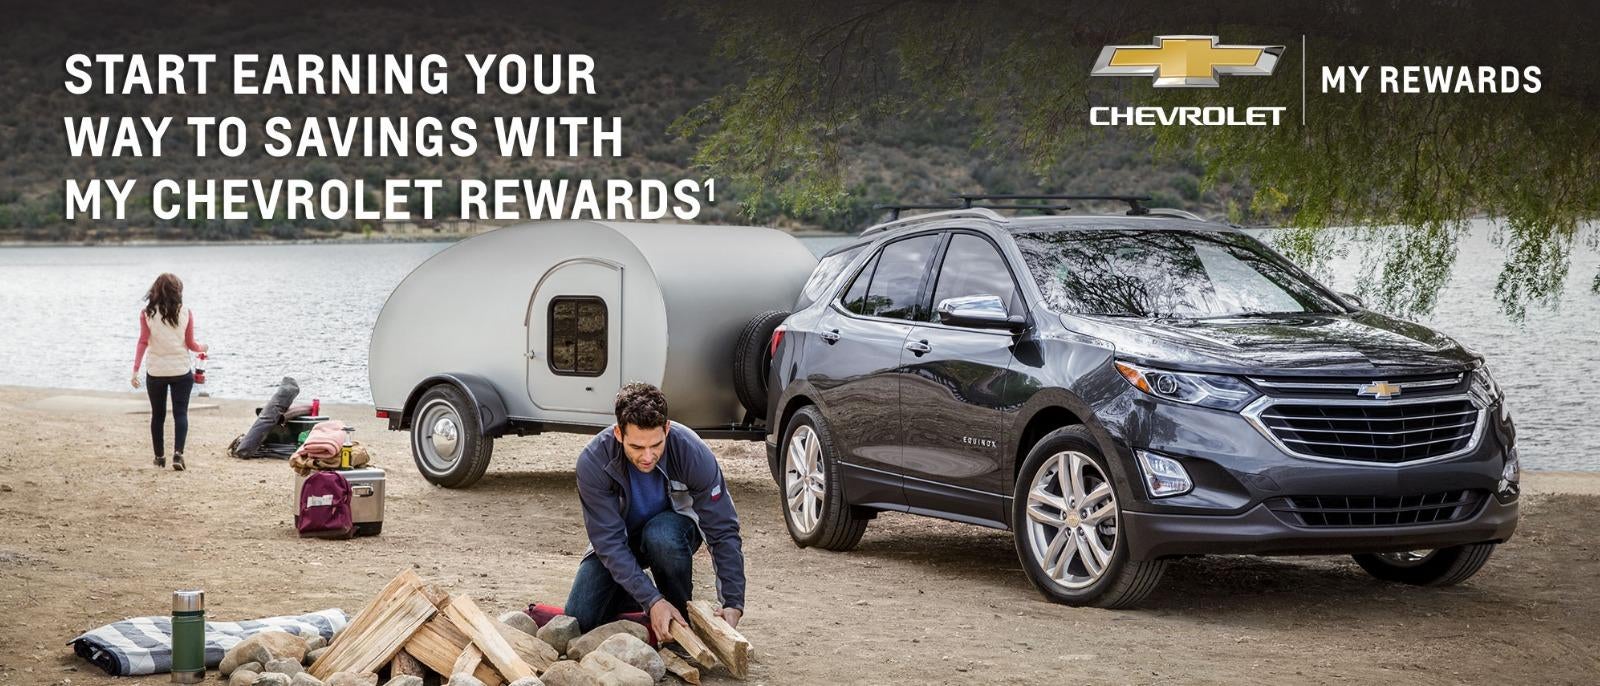 Start earning your way to savings with my Chevrolet Rewards